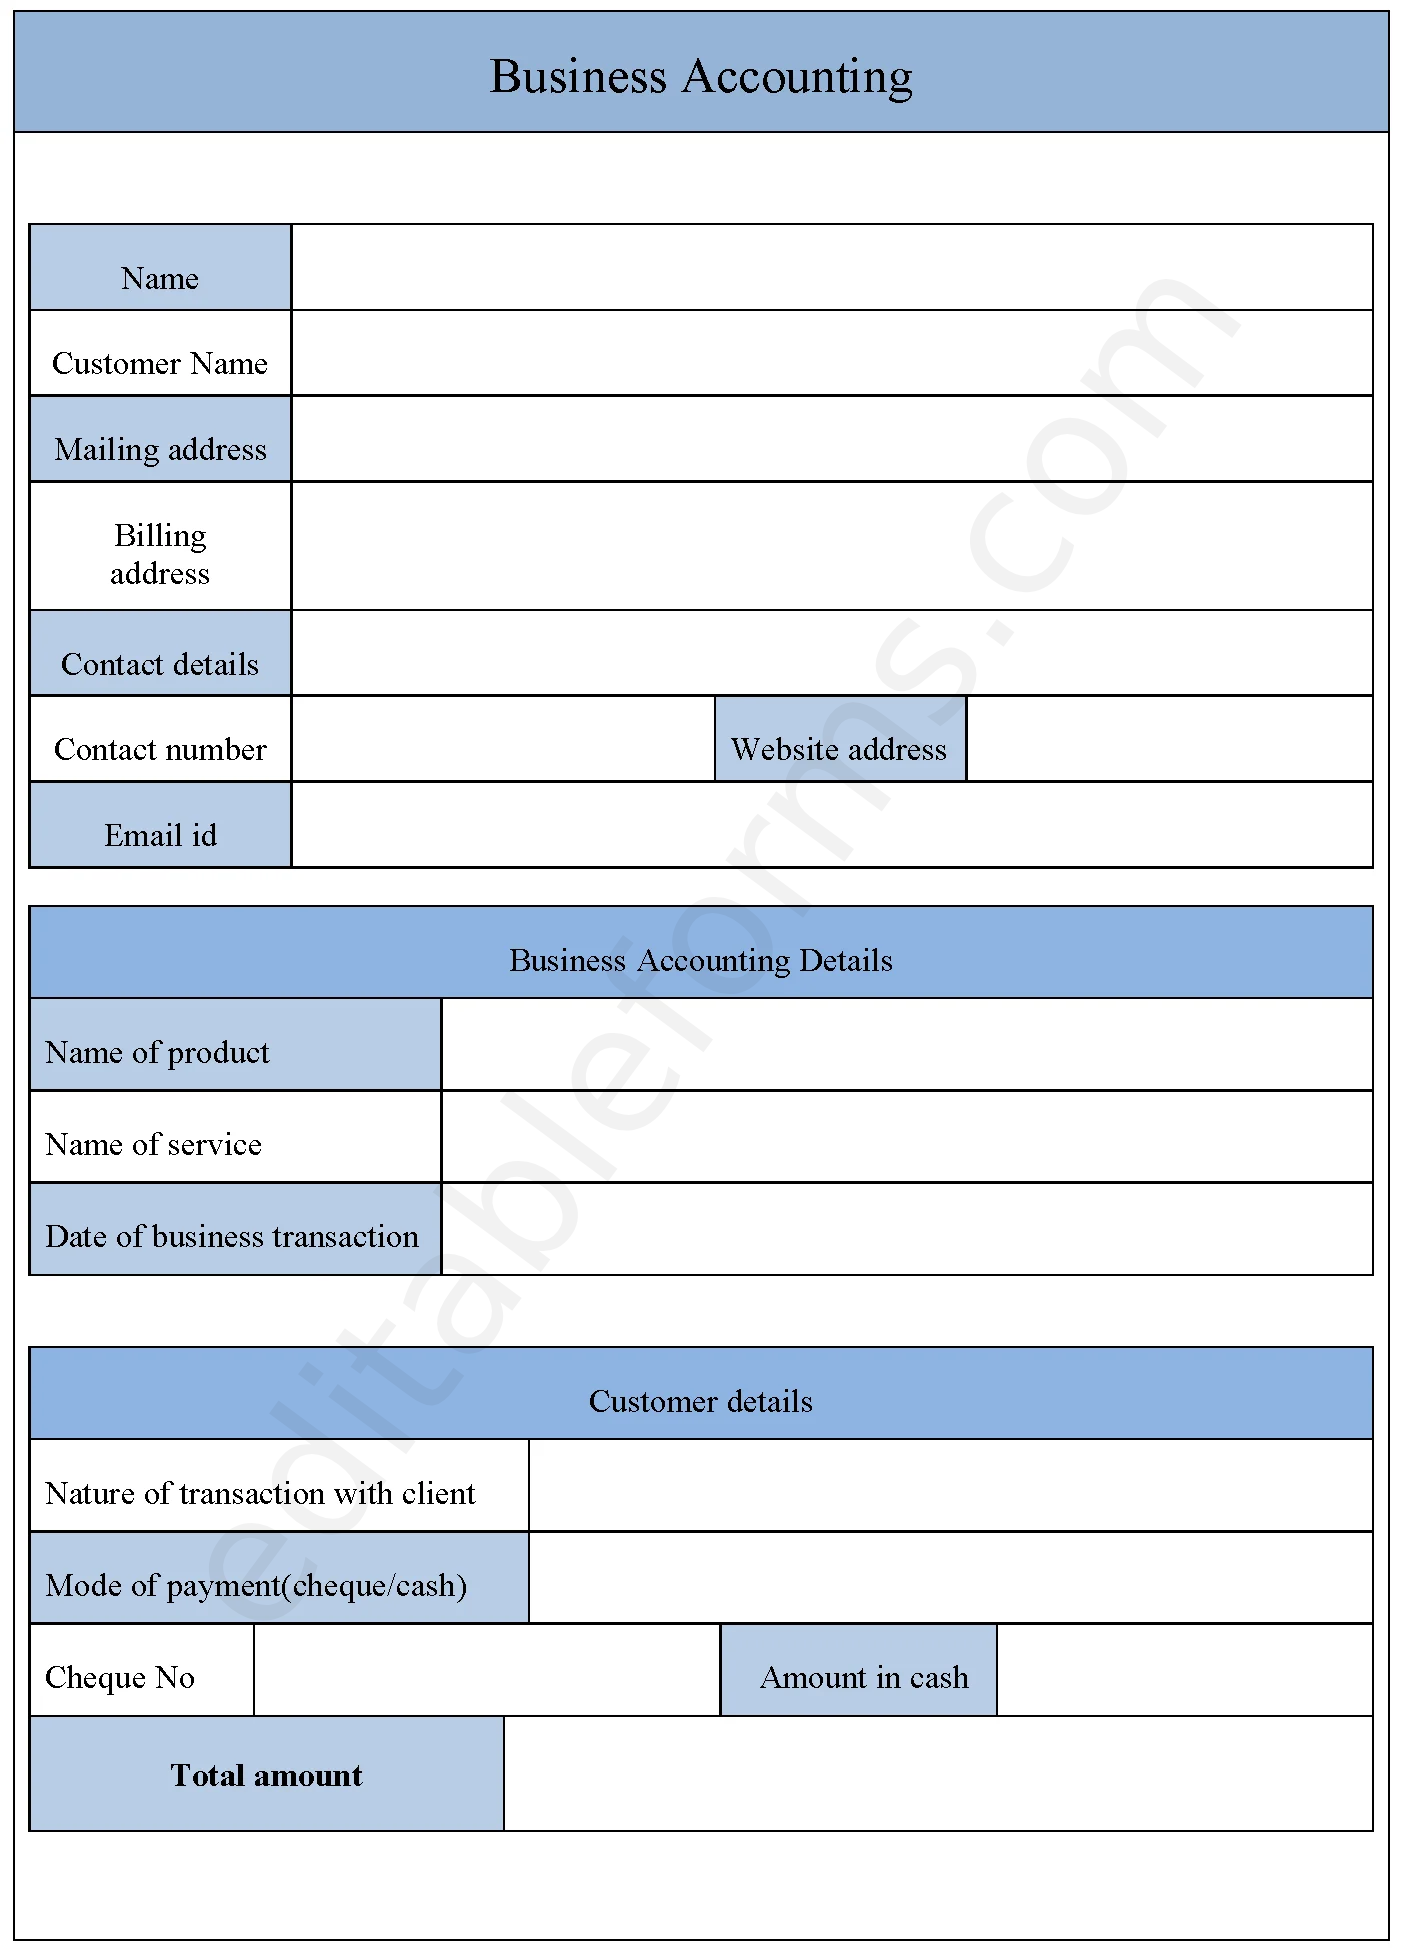 Business Accounting Fillable PDF Template